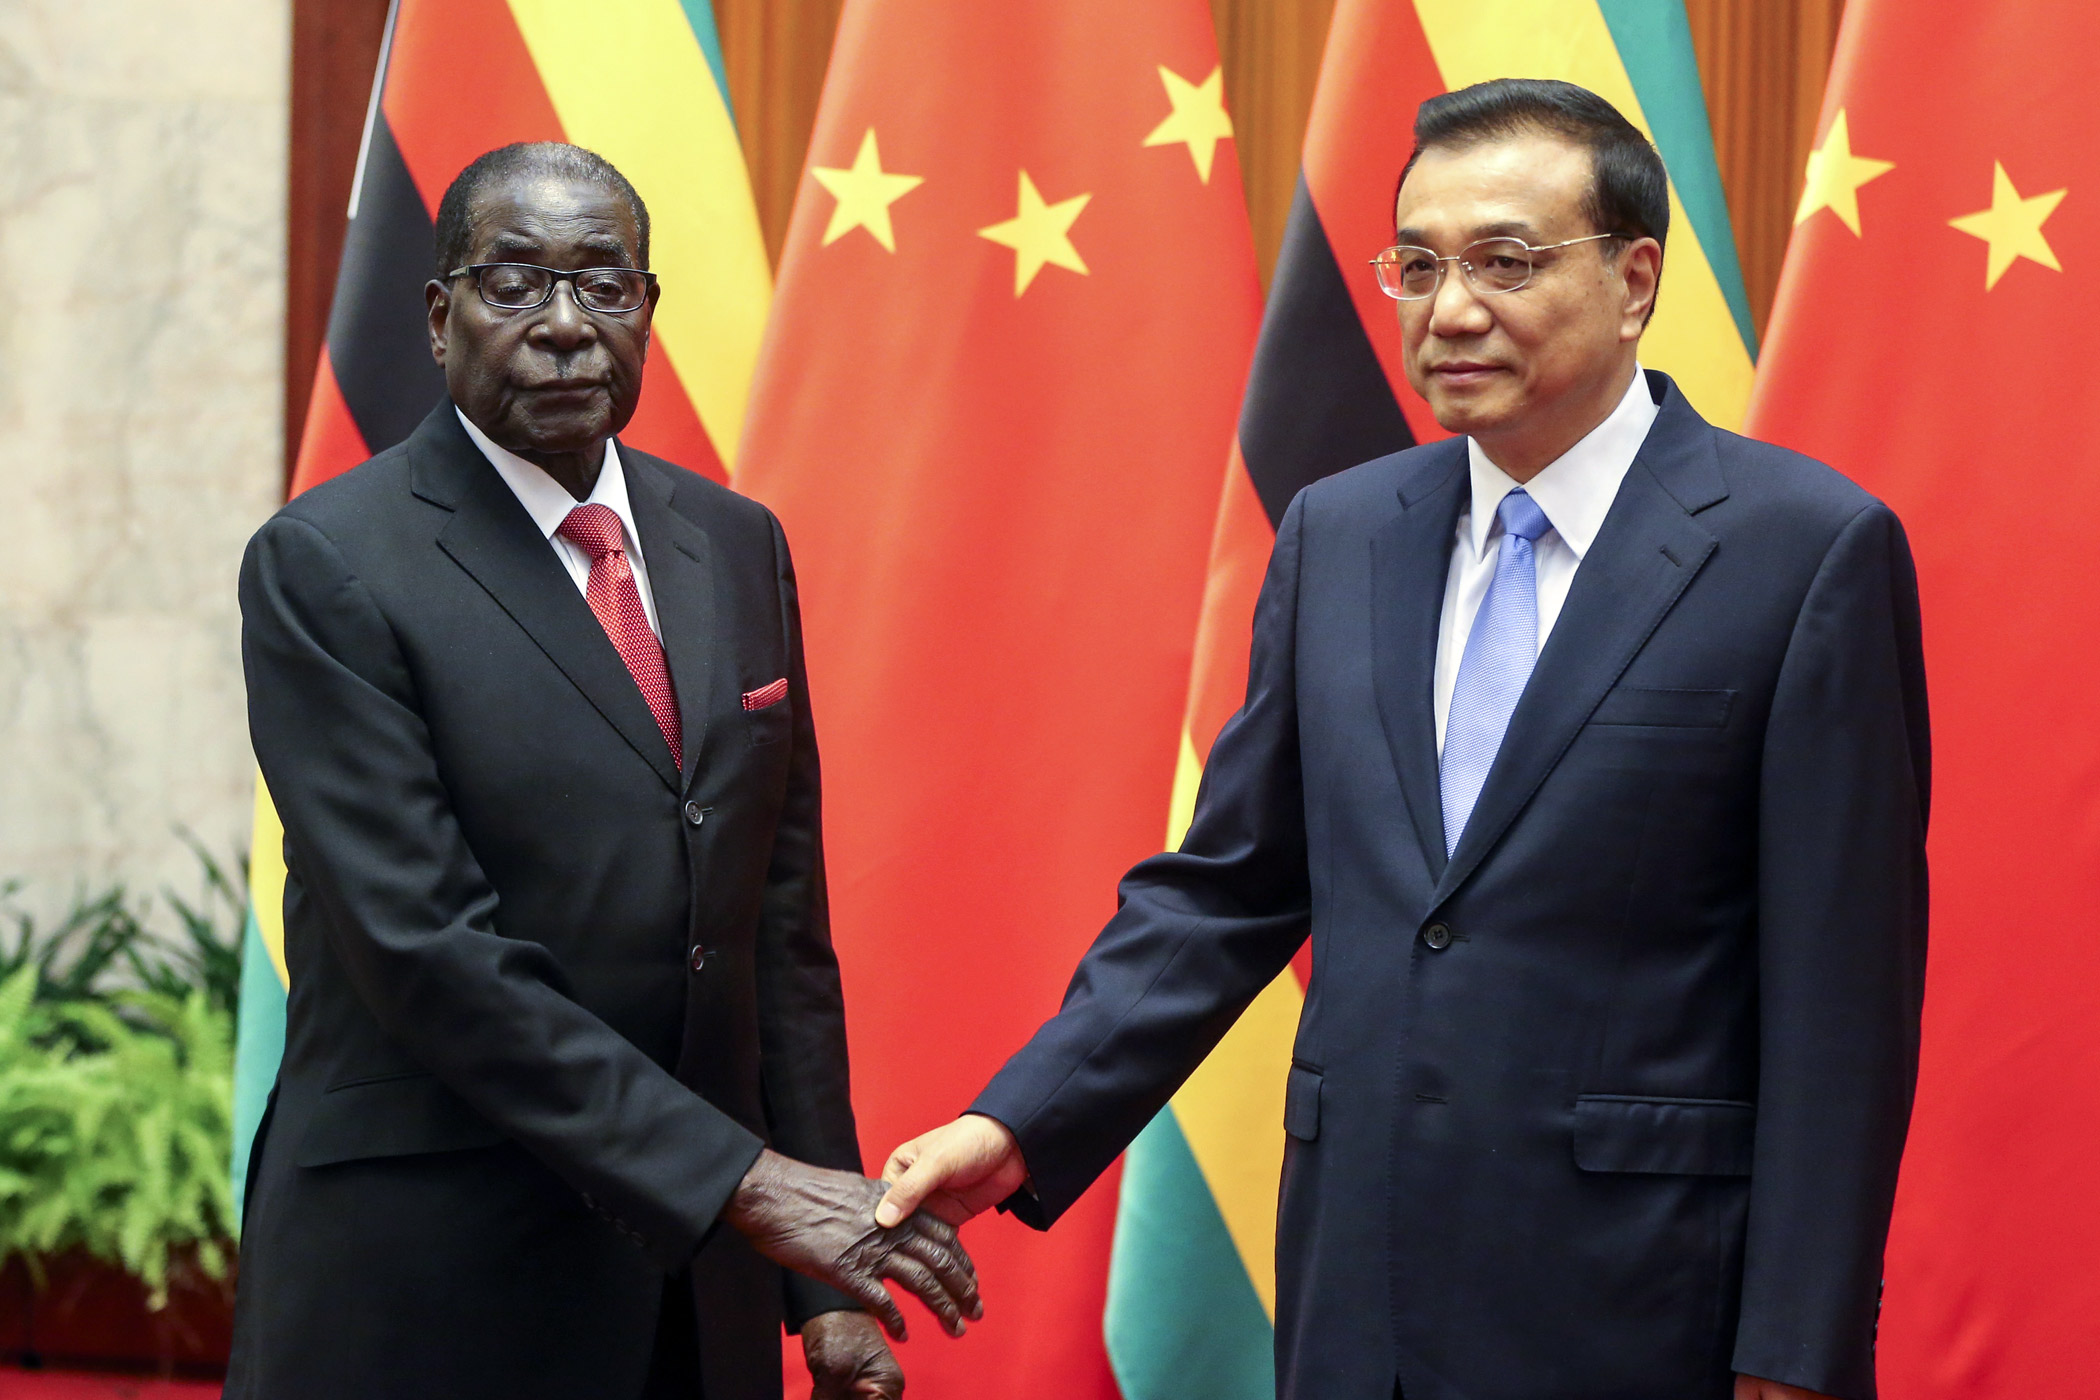 Zimbabwean President Robert Mugabe, left, meets Chinese Premier Li Keqiang at the Great Hall of the People on Aug. 26, 2014 in Beijing.